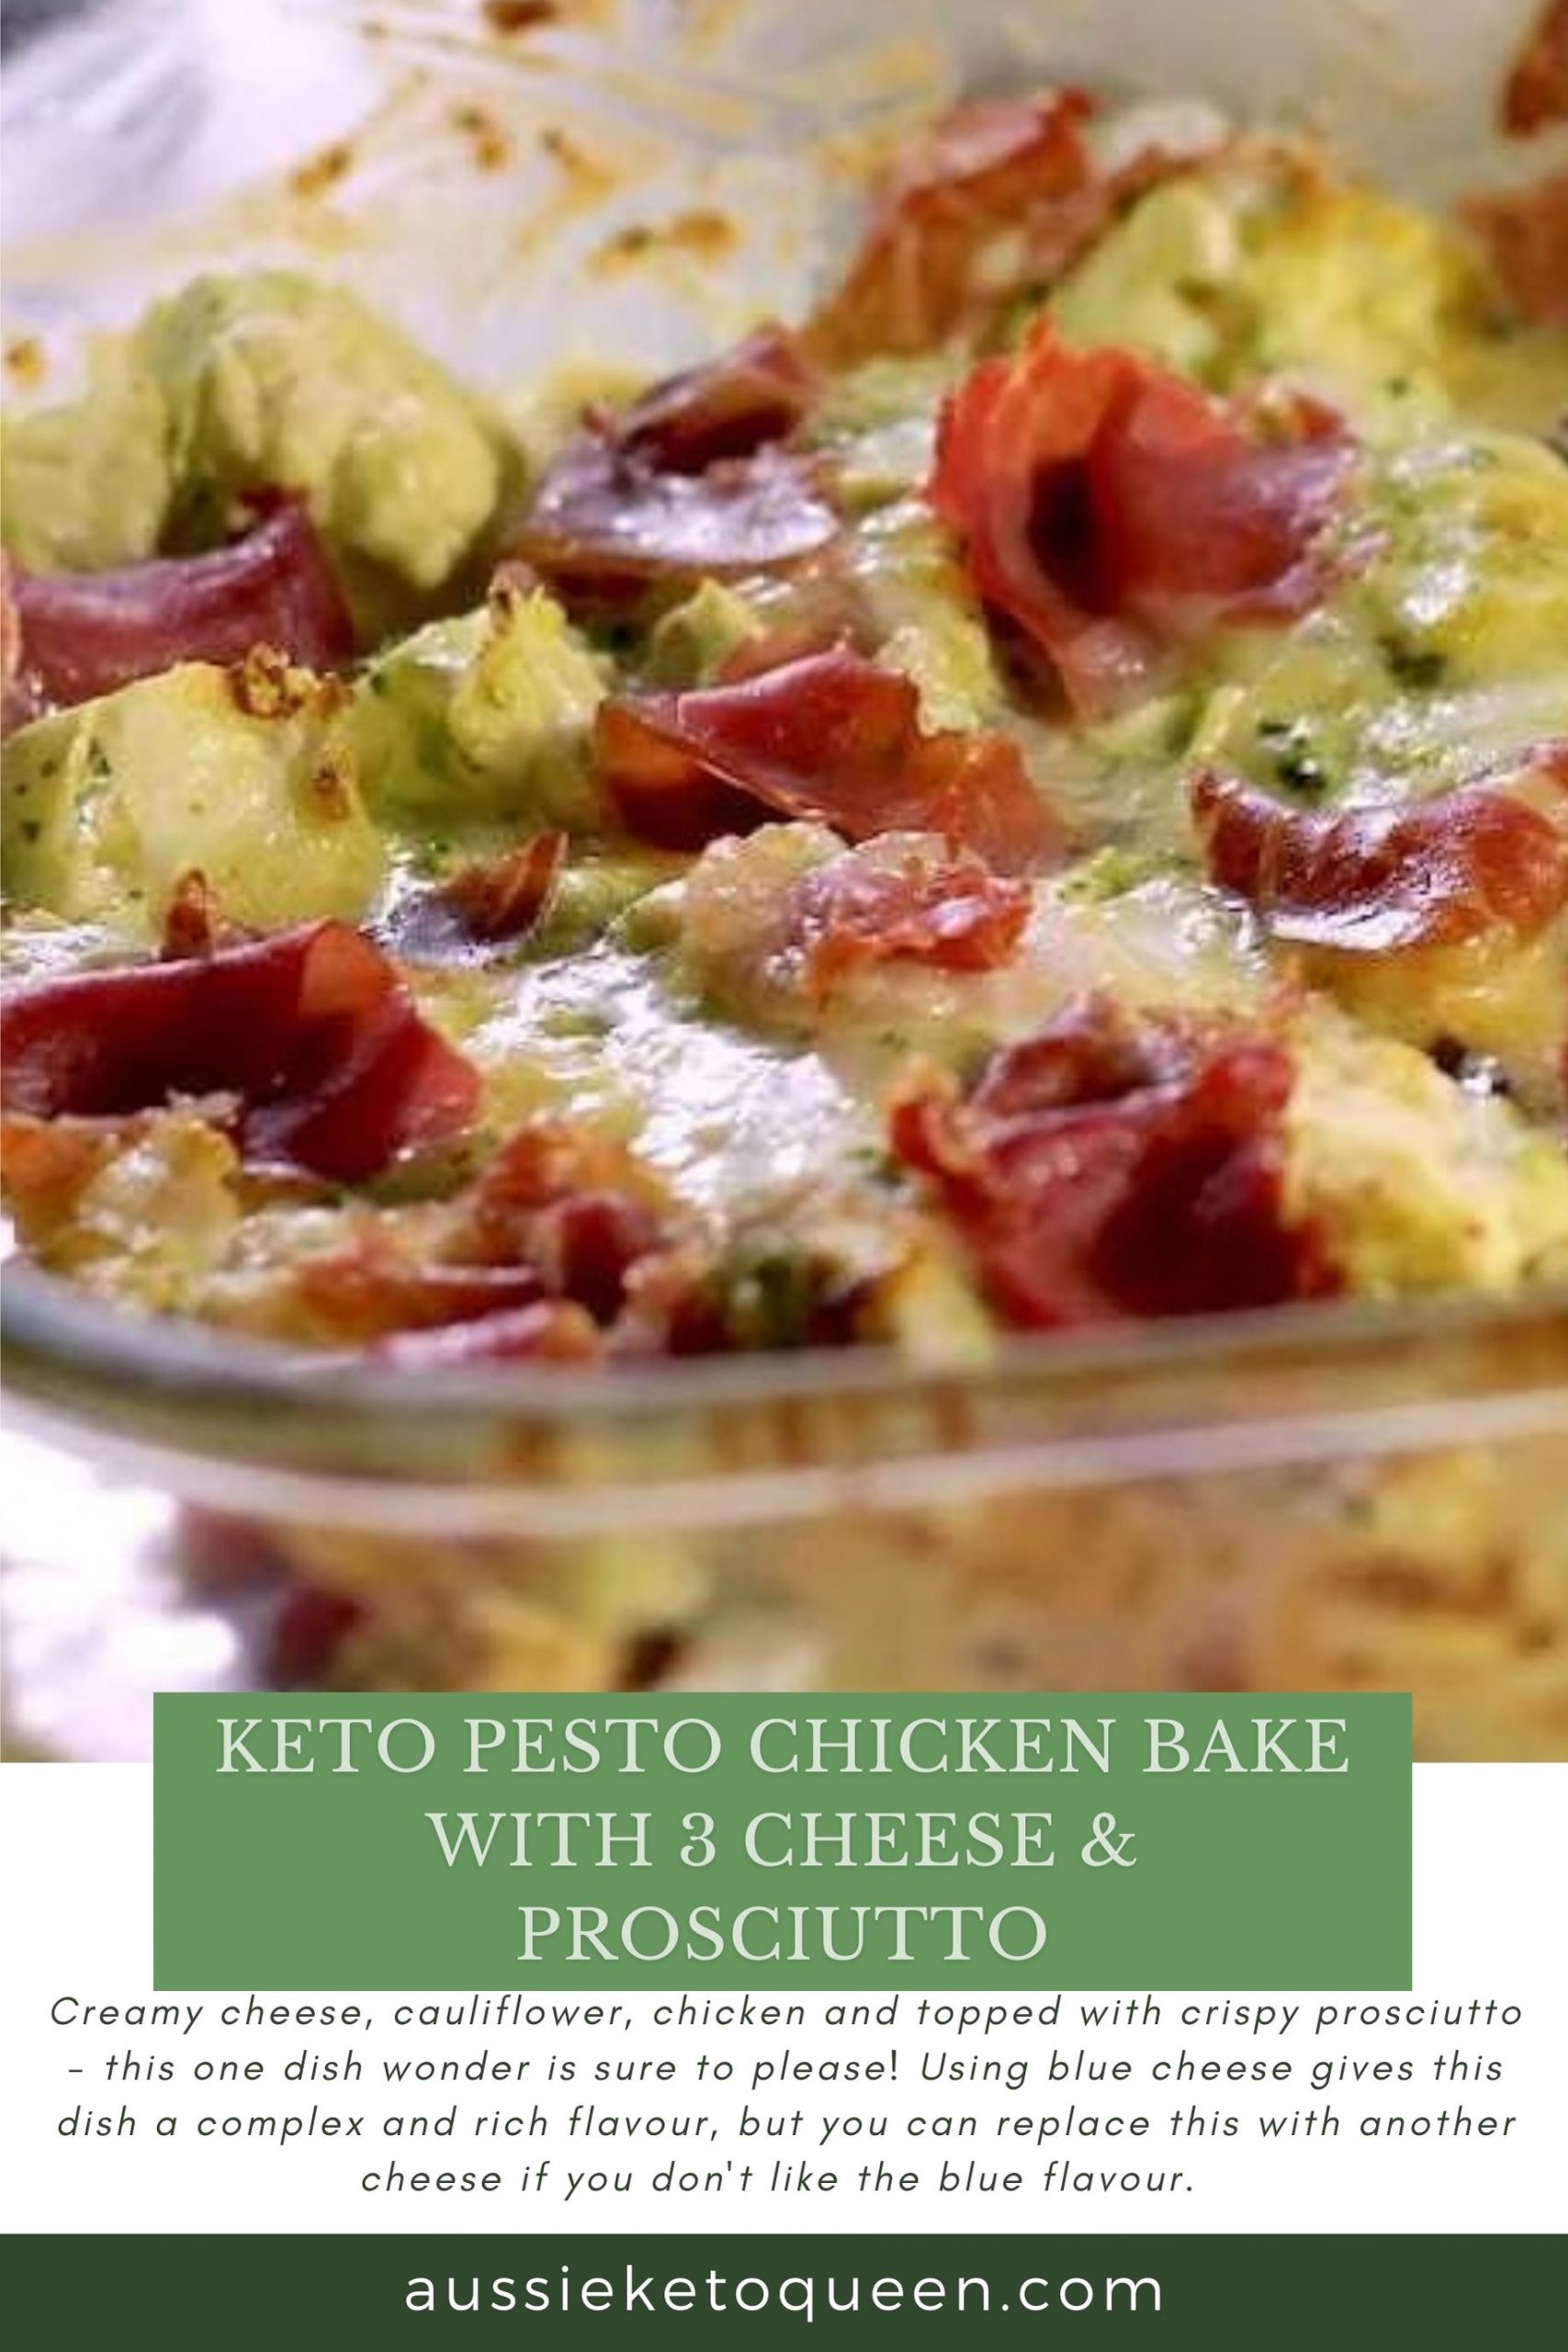 Keto Pesto Chicken BakeKeto Pesto Chicken Bake with 3 Cheese & Prosciutto by Aussie Keto Queen. Cheese, chicken and cauliflower are solid keto staples, and are on my shopping list every week. Today, I decided to use up some different cheeses I had in the fridge and created this Keto Pesto Chicken Bake! #keto #ketorecipes #ketogenicdiet